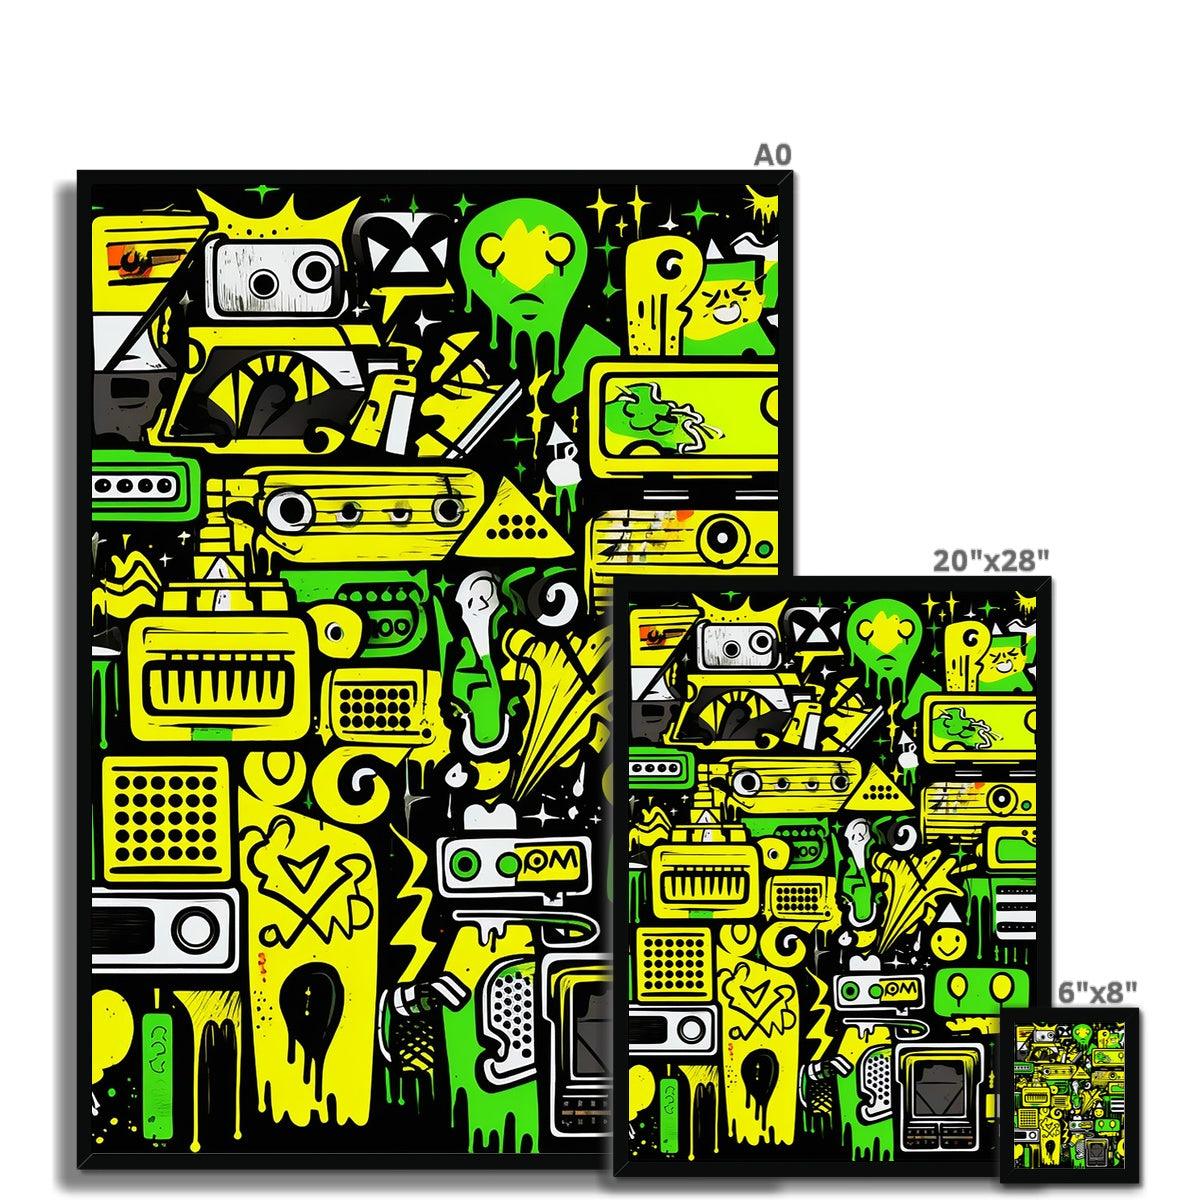 Graffiti Green and Yellow Abstract: A Dive into Vibrant Urban Art Framed Print - D'Sare 